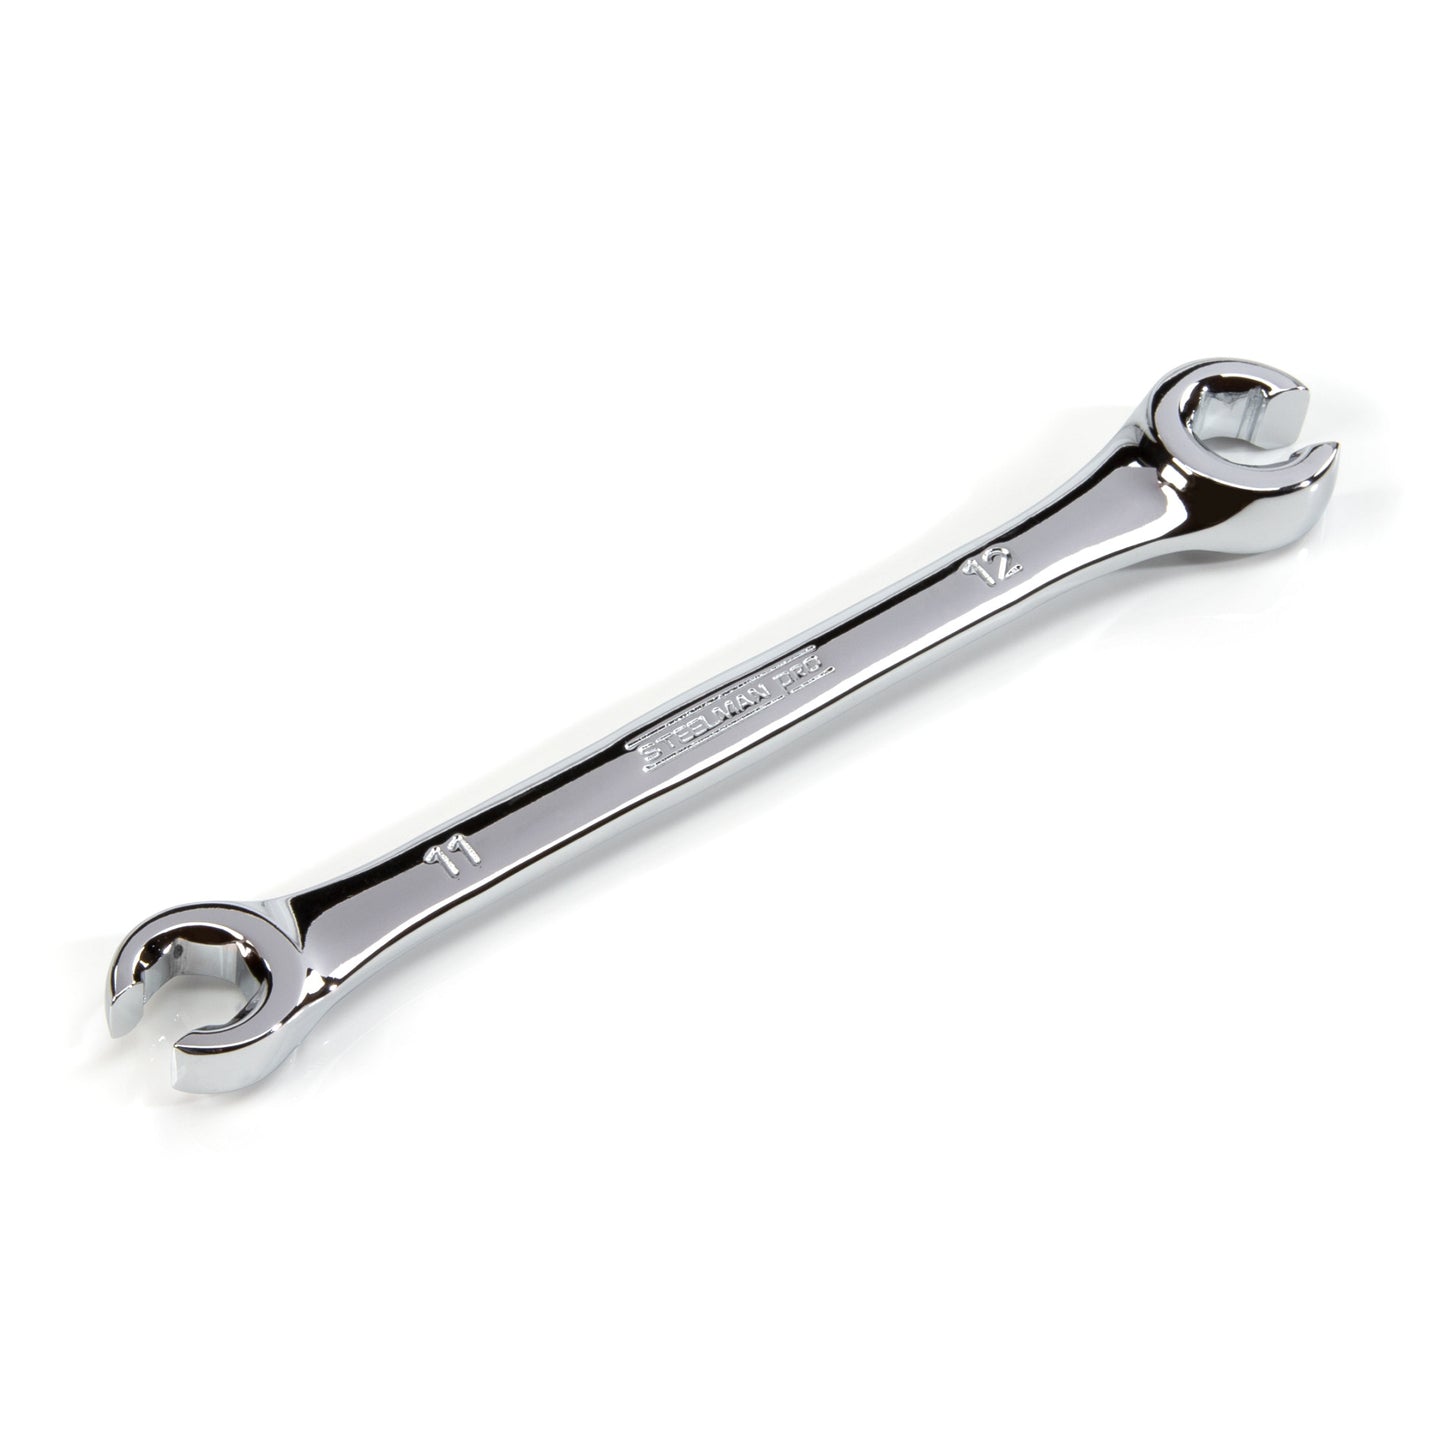 11mm x 12mm Double Ended 6-Point Metric Flare Nut Wrench